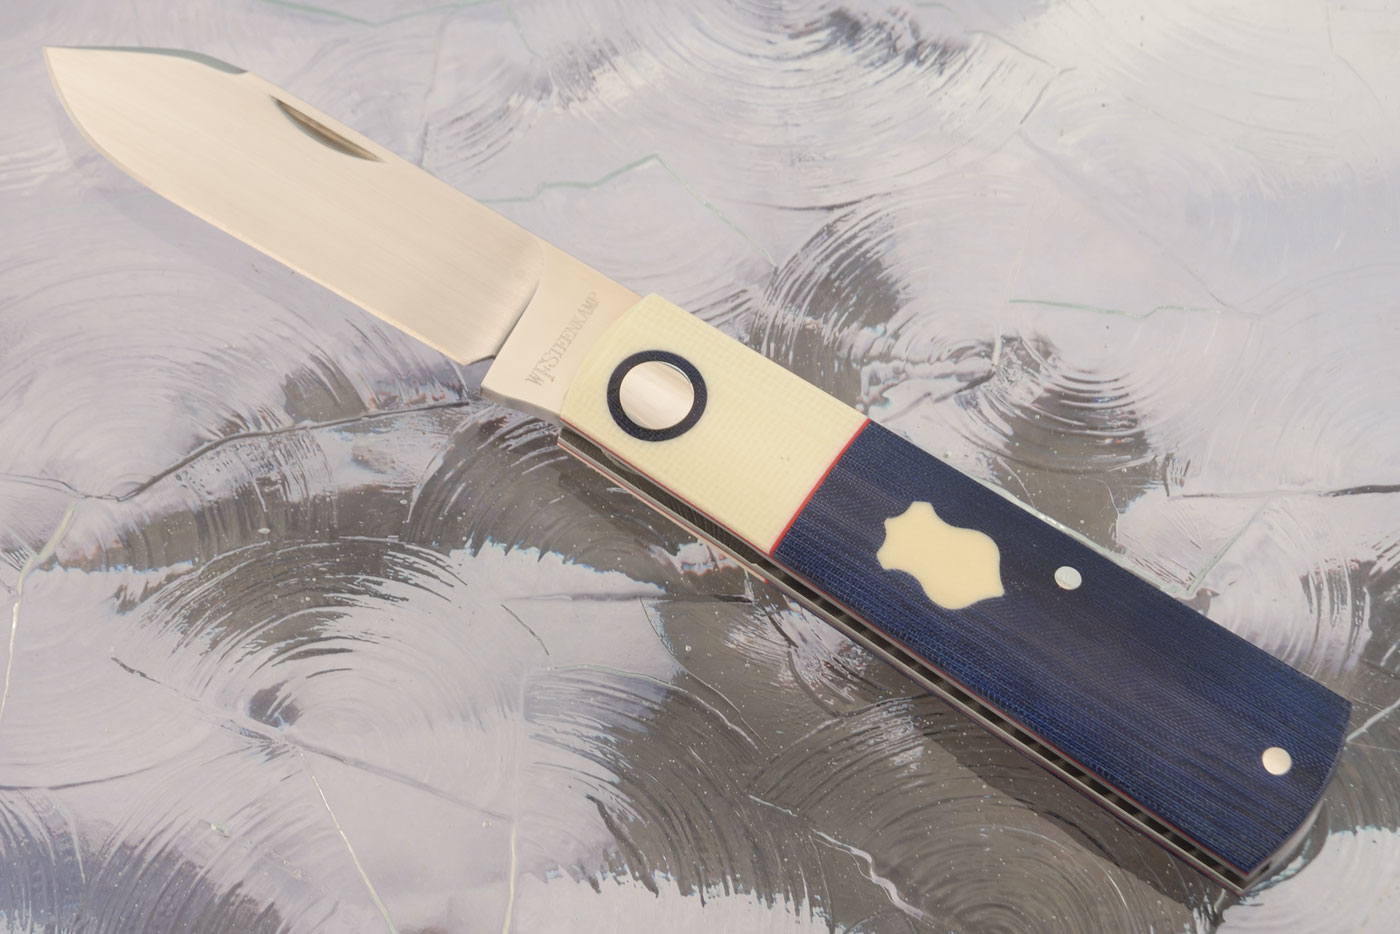 Barlow Slipjoint with Blue Micarta and Ivory G10 - M390